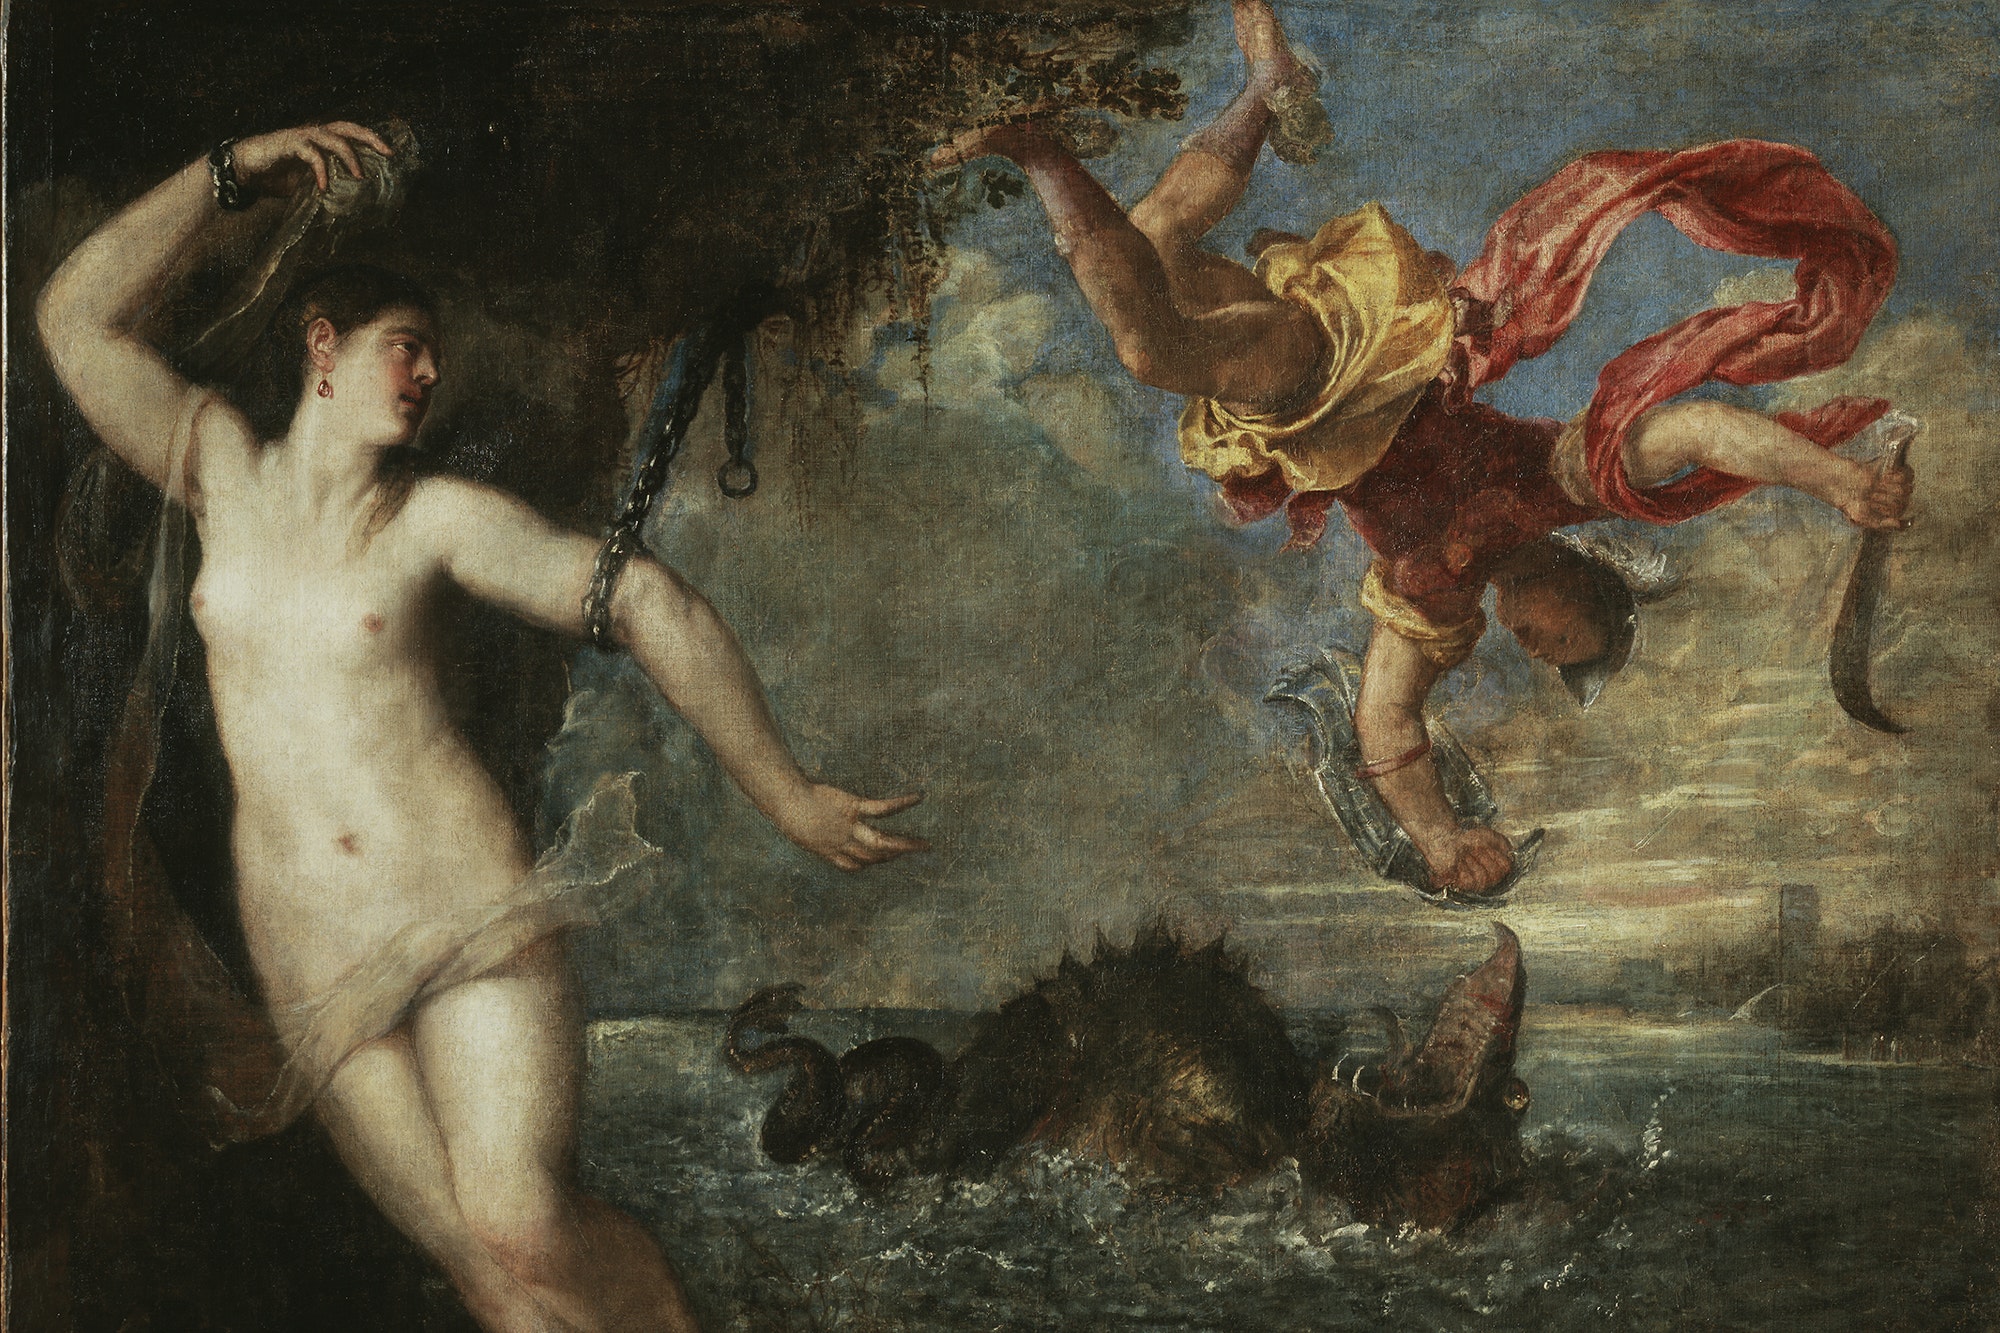 Wallace Collection’s first loan to reunite great Titian mythological works